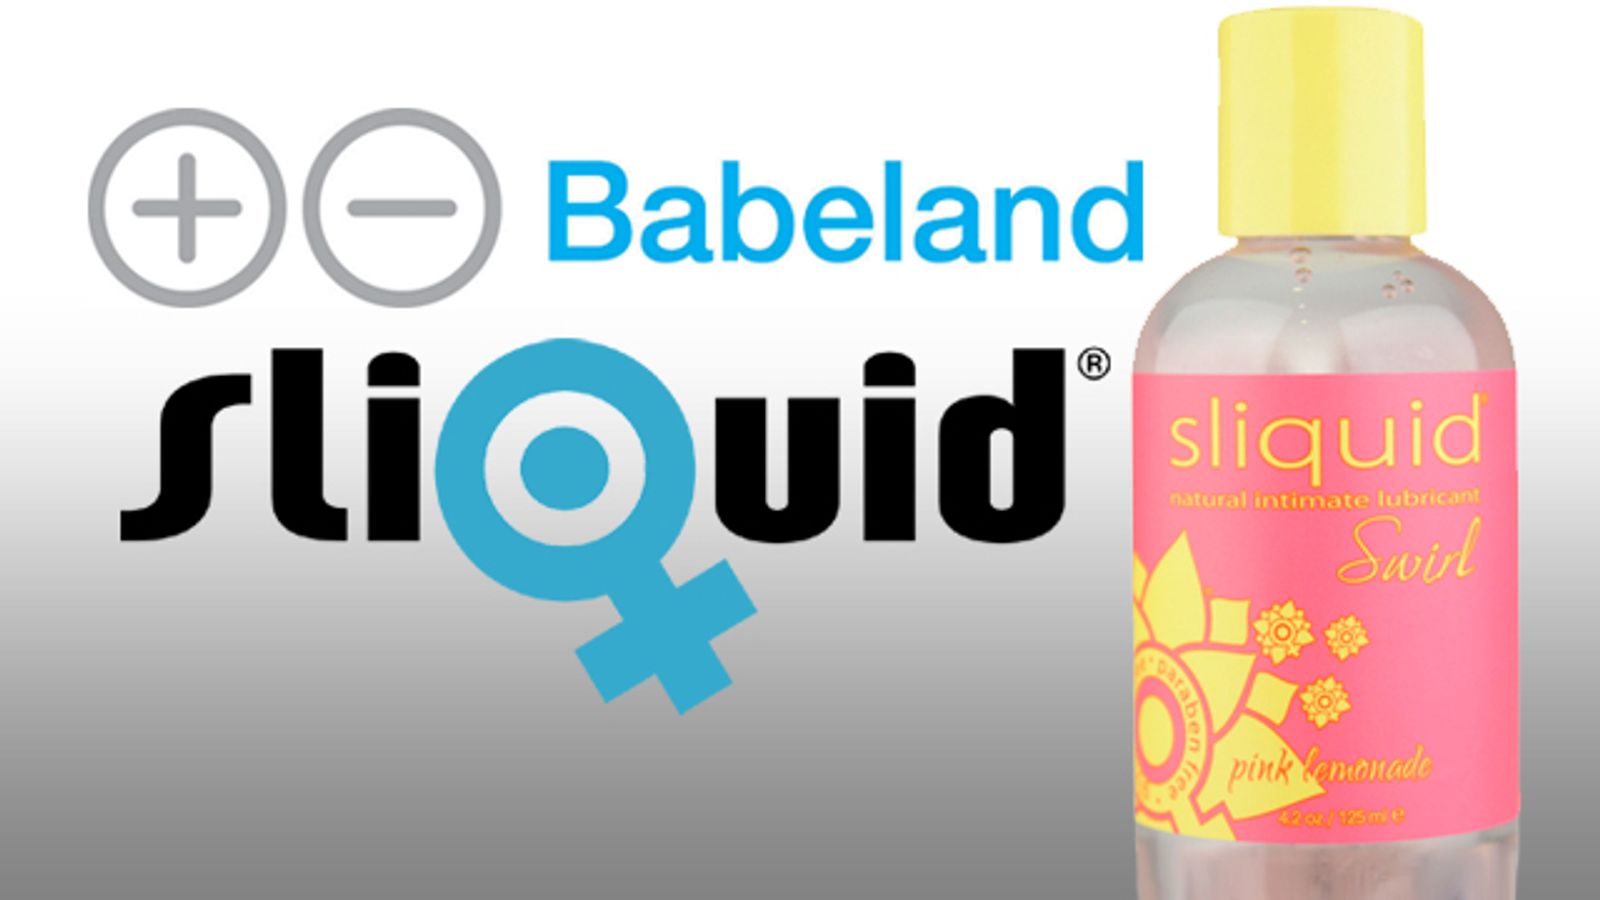 Sliquid, Babeland Formulate Fun-Flavored Lube for Breast Cancer Fight